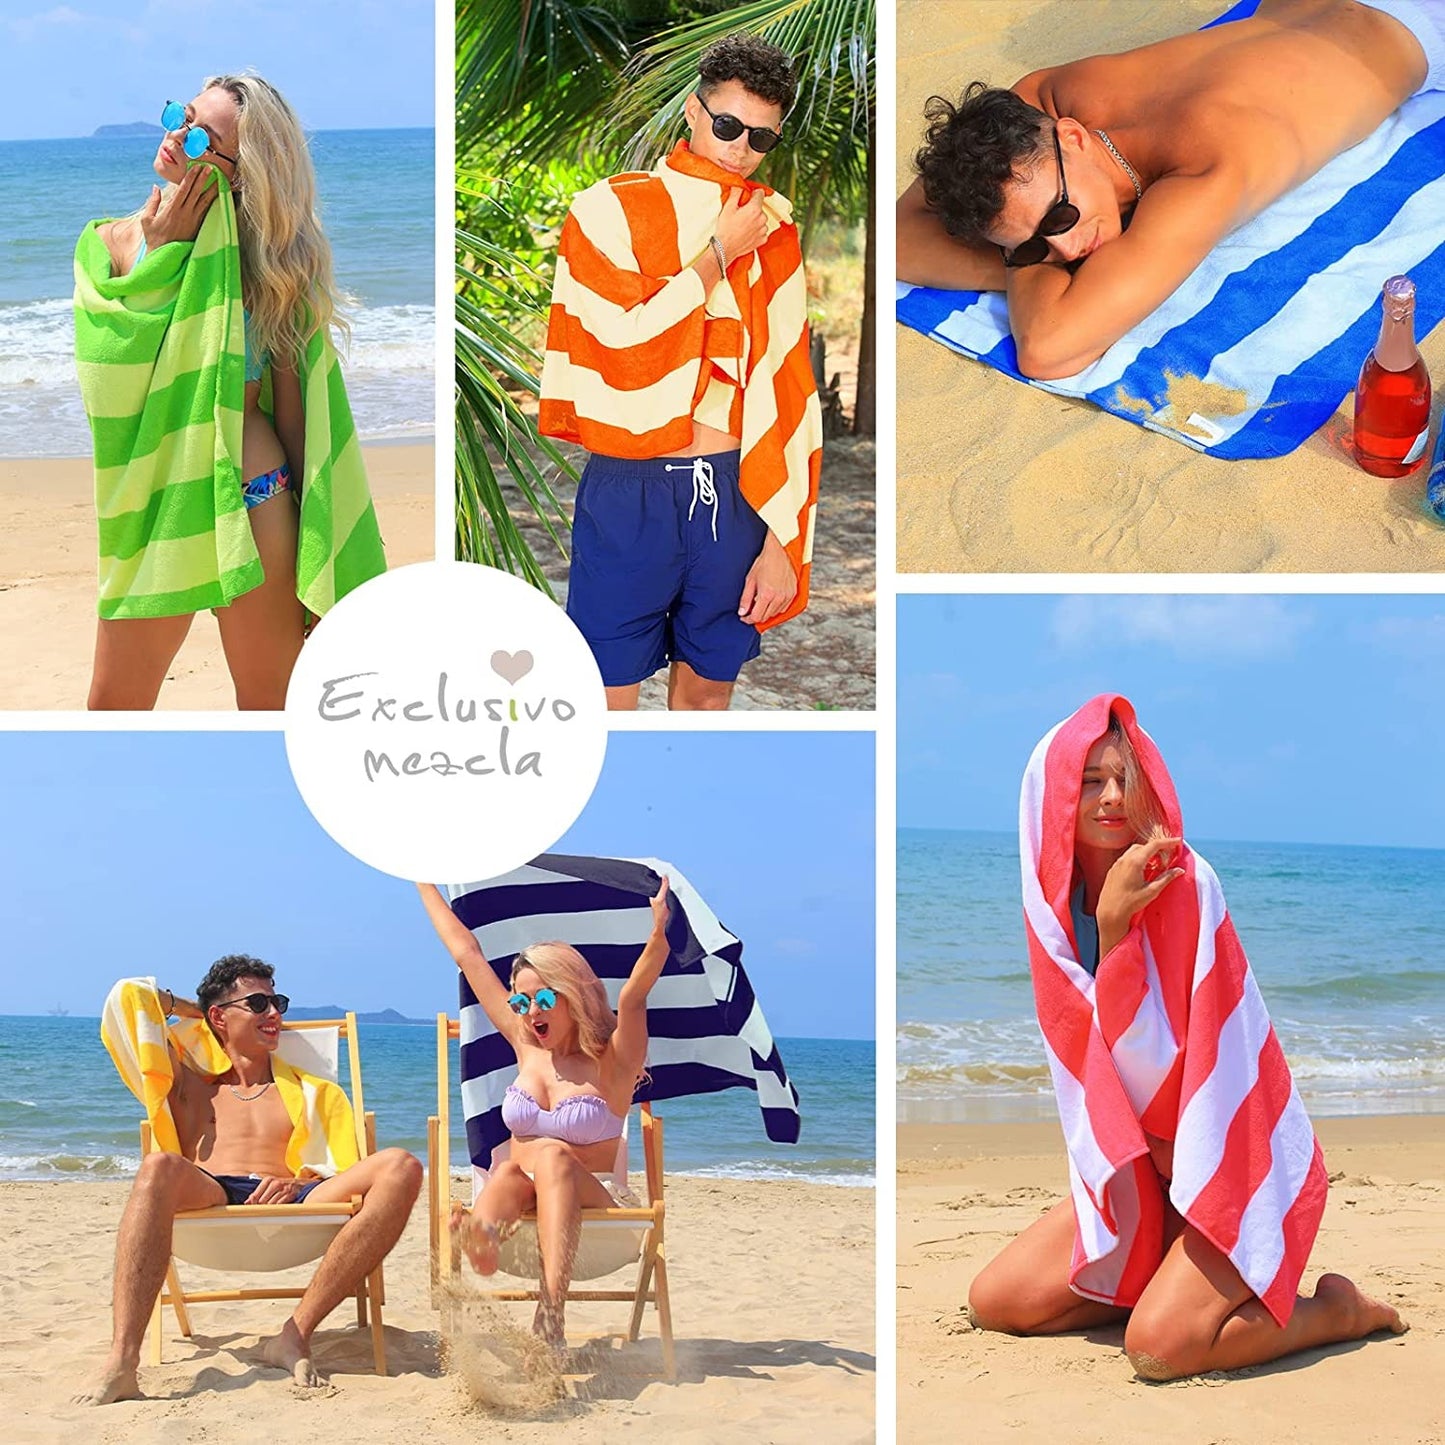 Exclusivo Mezcla 4 Pack Microfiber Cabana Striped Large Beach/Pool/Bath Towel for Adults (Pink, 30" x 60") - Soft, Quick Dry, Lightweight and Absorbent